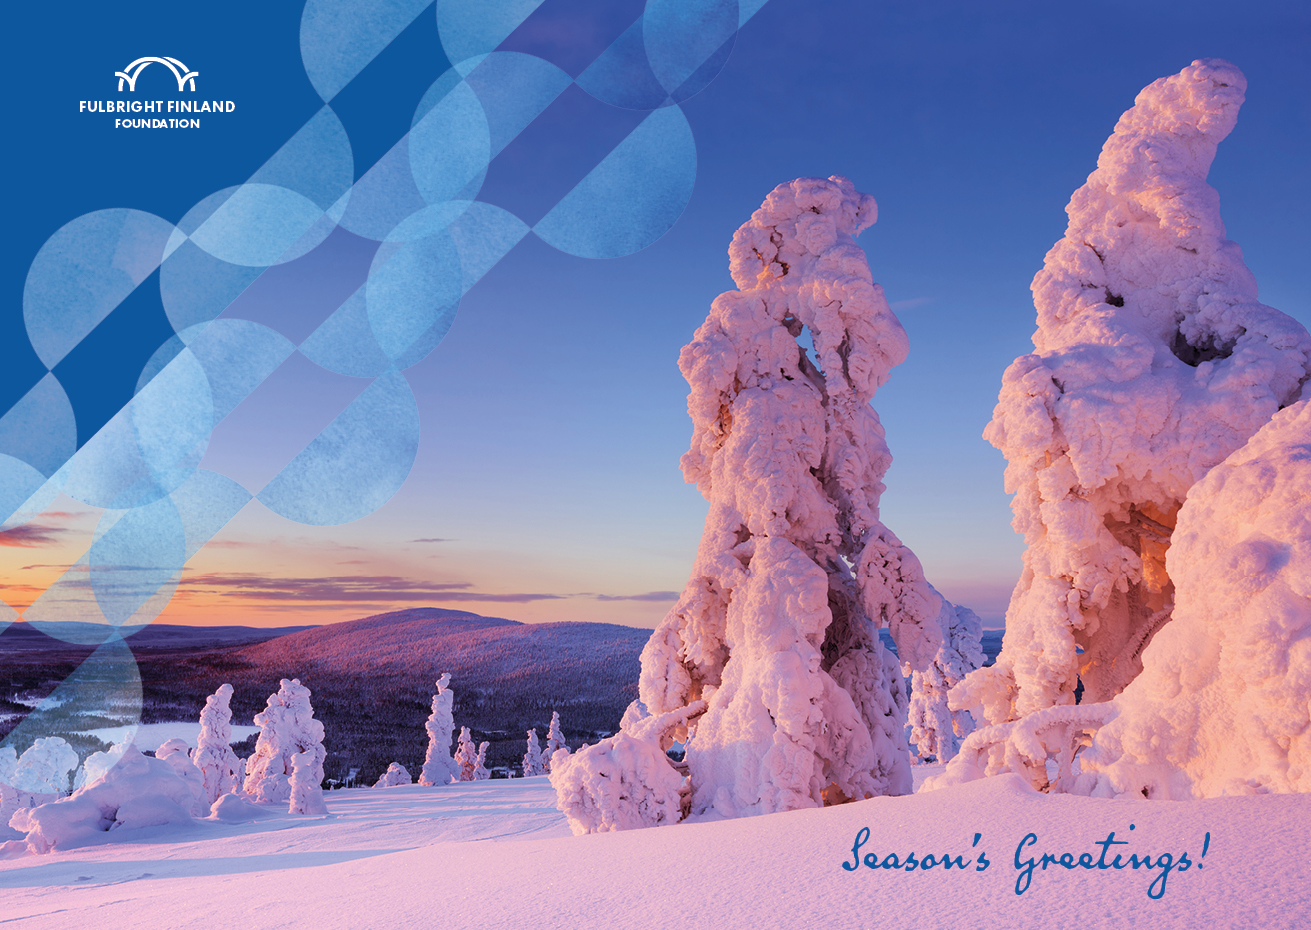 A wintery view, taken in Lapland, Finland. There is a lot of snow on trees, and a fell can be seen in the background. Sun is shining from low, coloring the photo in reds and yellows. There is a Fulbright Finland Foundation logo on the right and it says "Season's Greetings!" on the bottom.